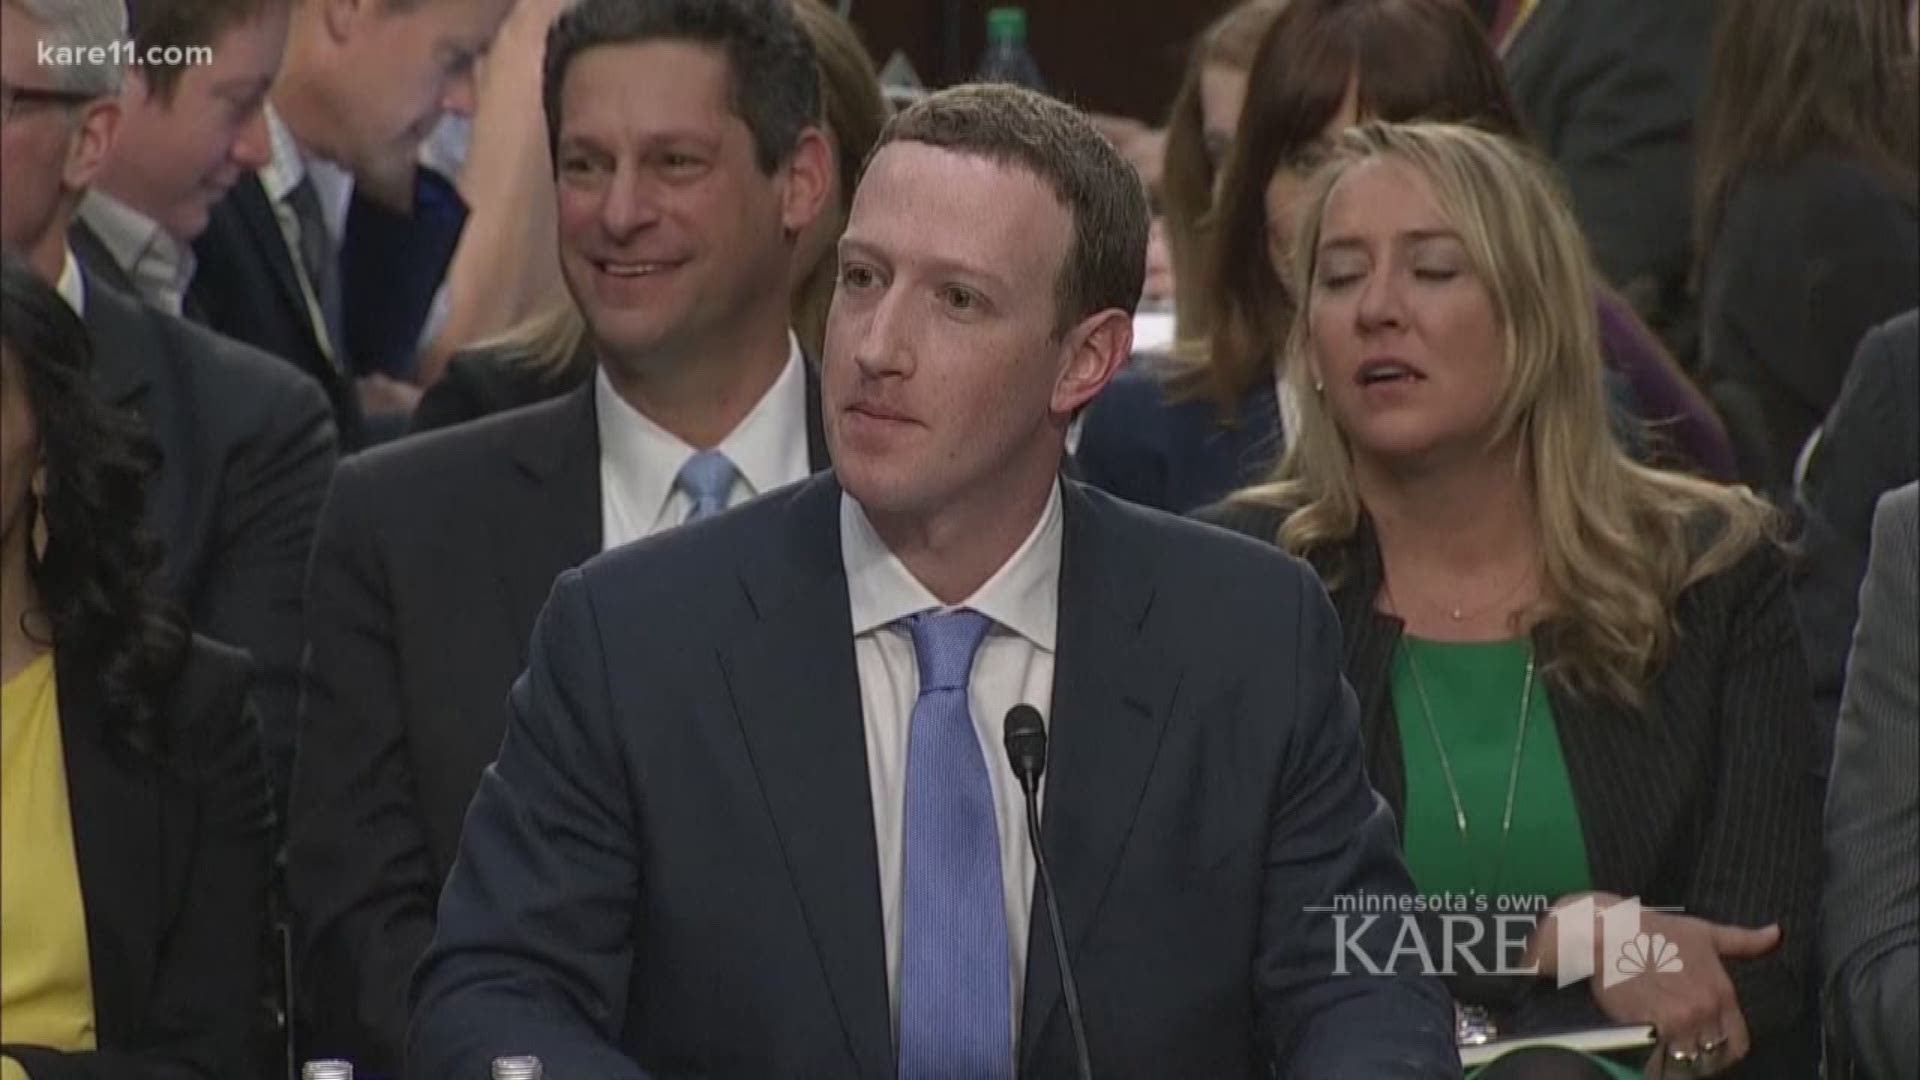 The question from Congress for Zuckerberg... will Facebook solve its problems on its own, or should Washington step in and regulate?https://kare11.tv/2HhqMBw